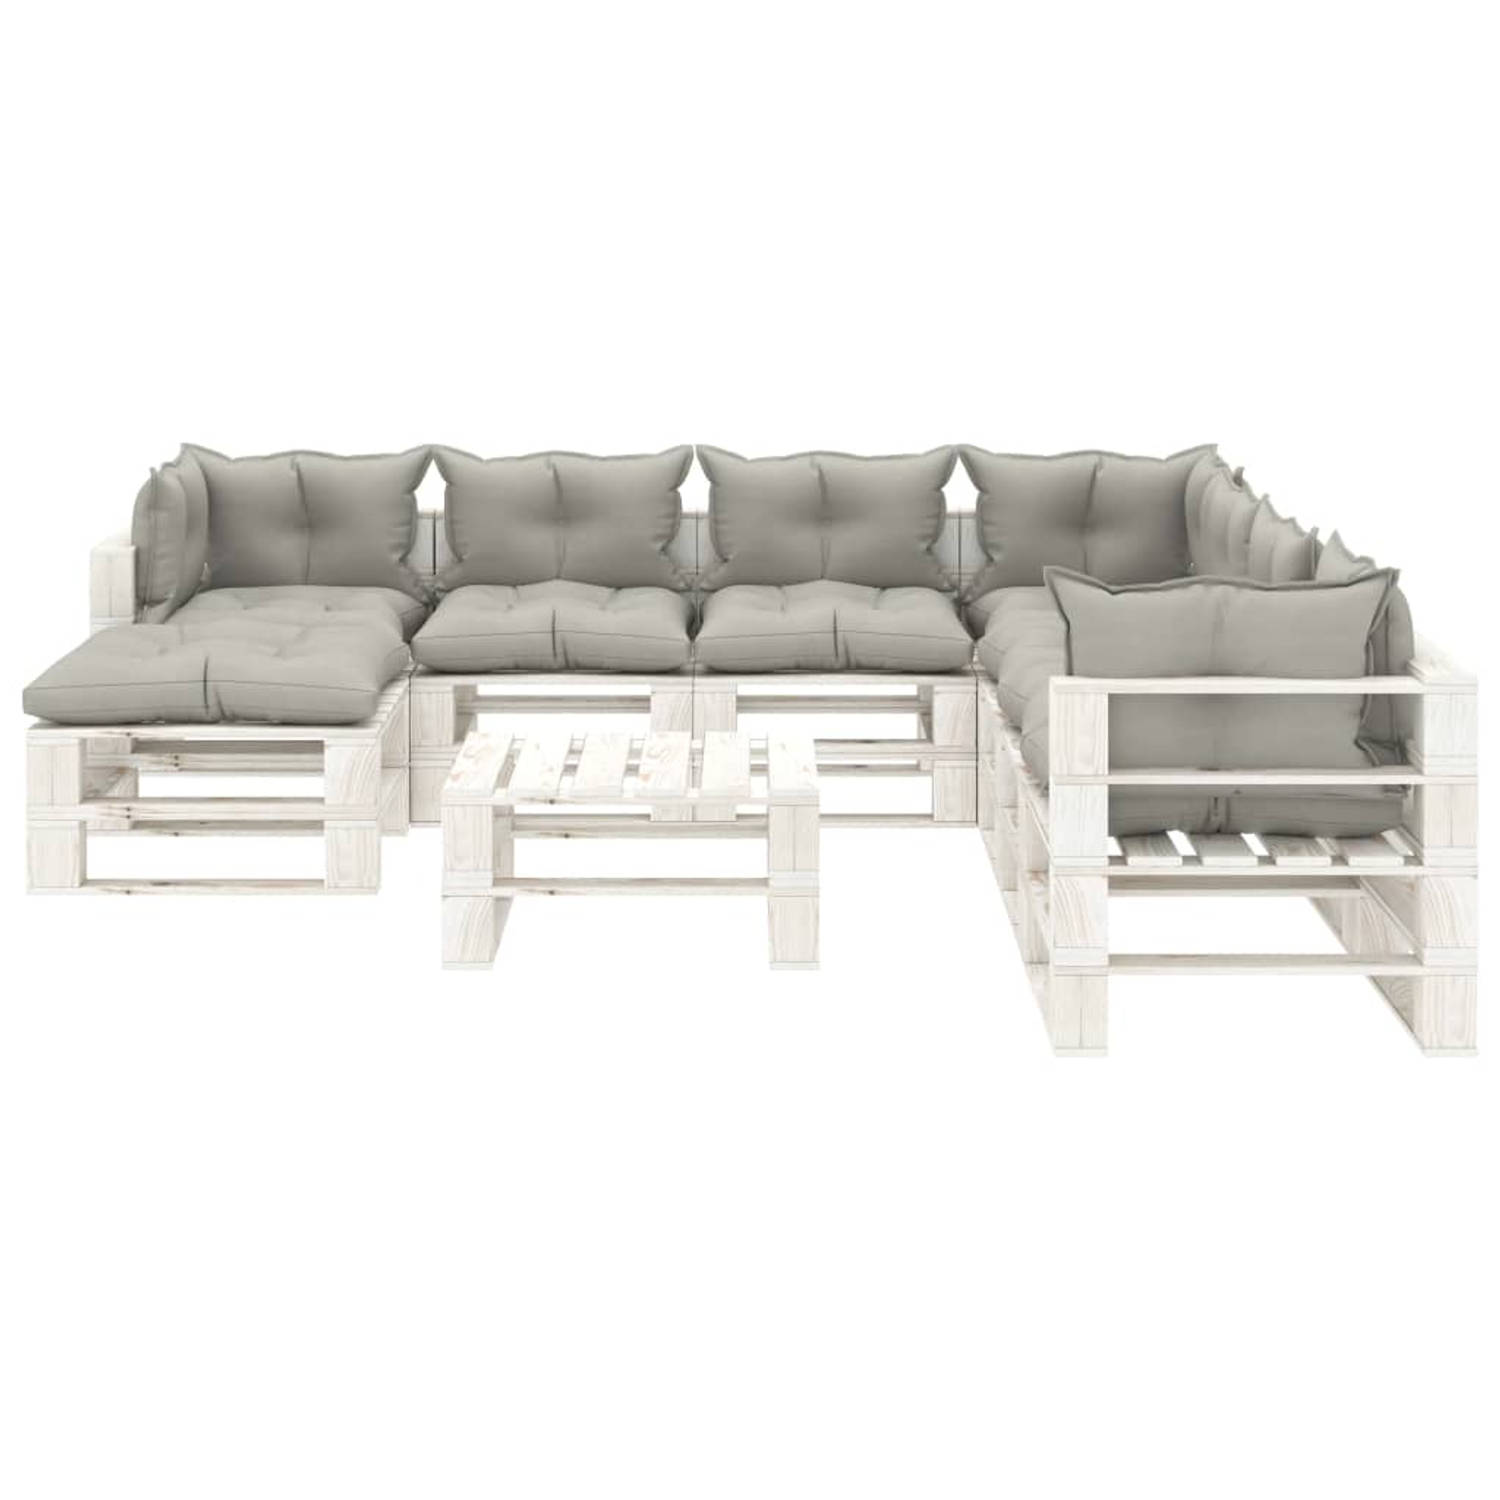 The Living Store Loungeset Pallet - 70 x 67.5 x 60.8 cm - Grenenhout - Taupe en wit